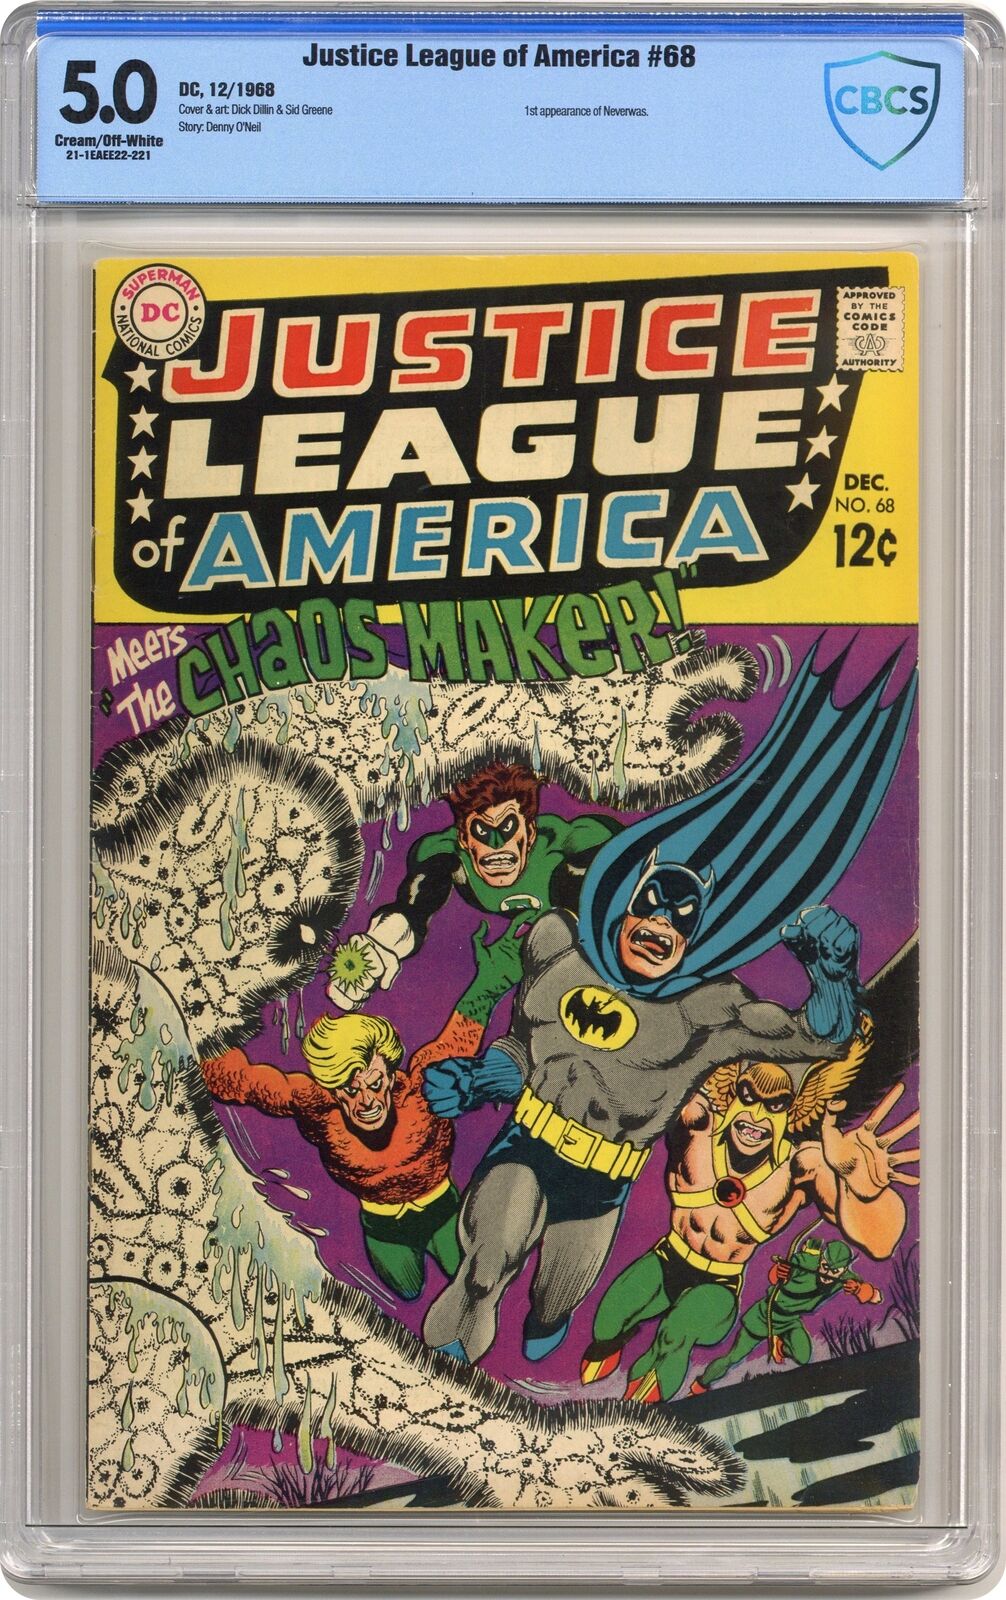 Justice League of America #68 CBCS 5.0 1968 21-1EAEE22-221